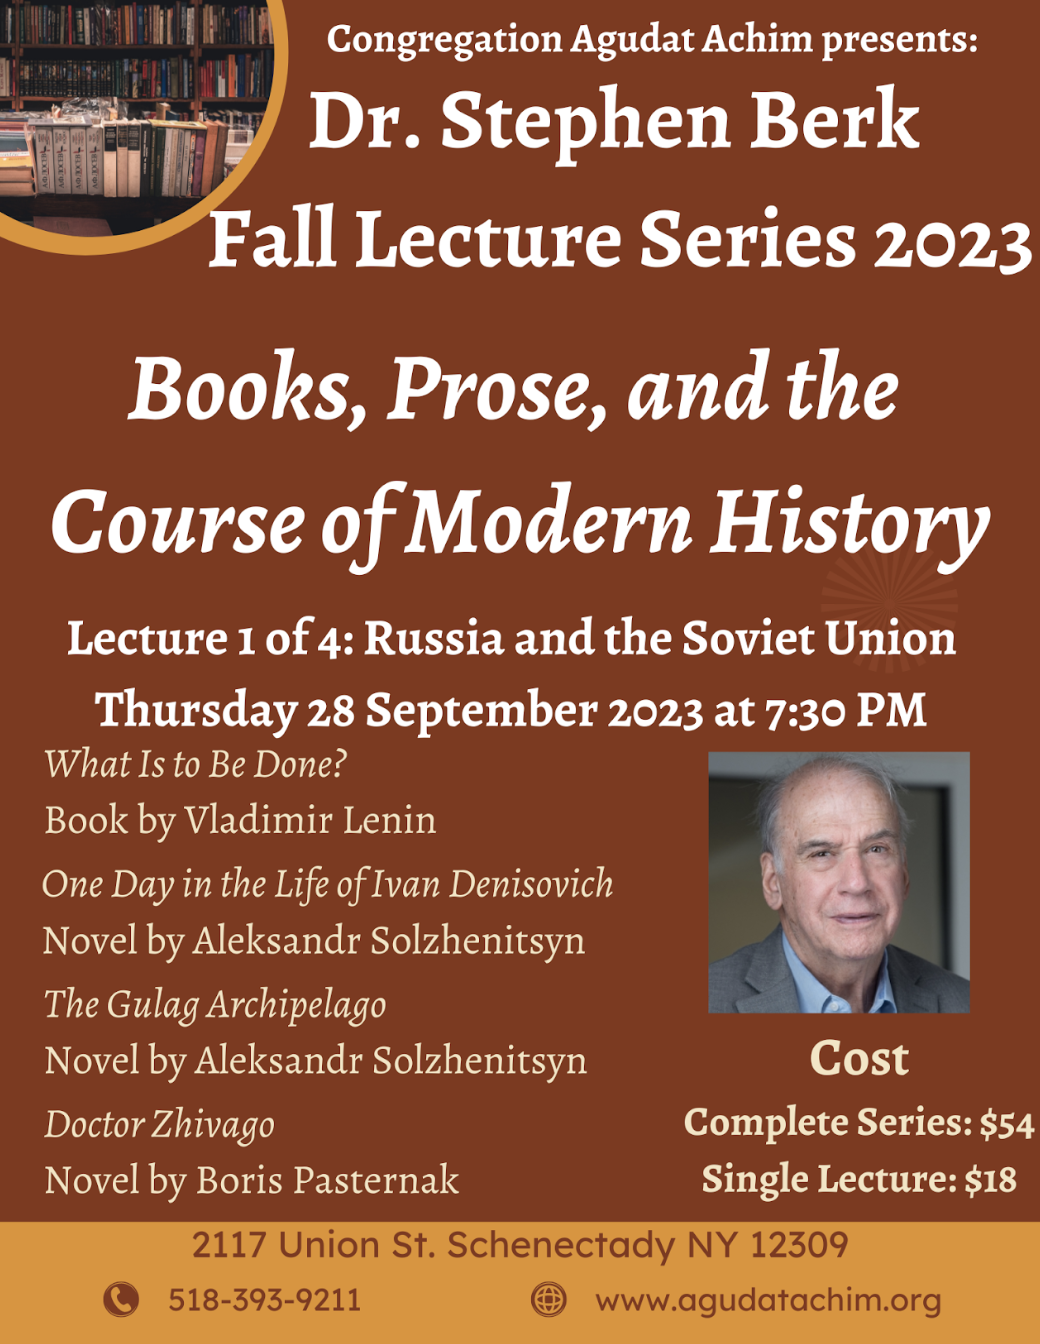 Dr. Berk Fall Lecture Series 2023 - Books, Prose, and the Course of Modern History